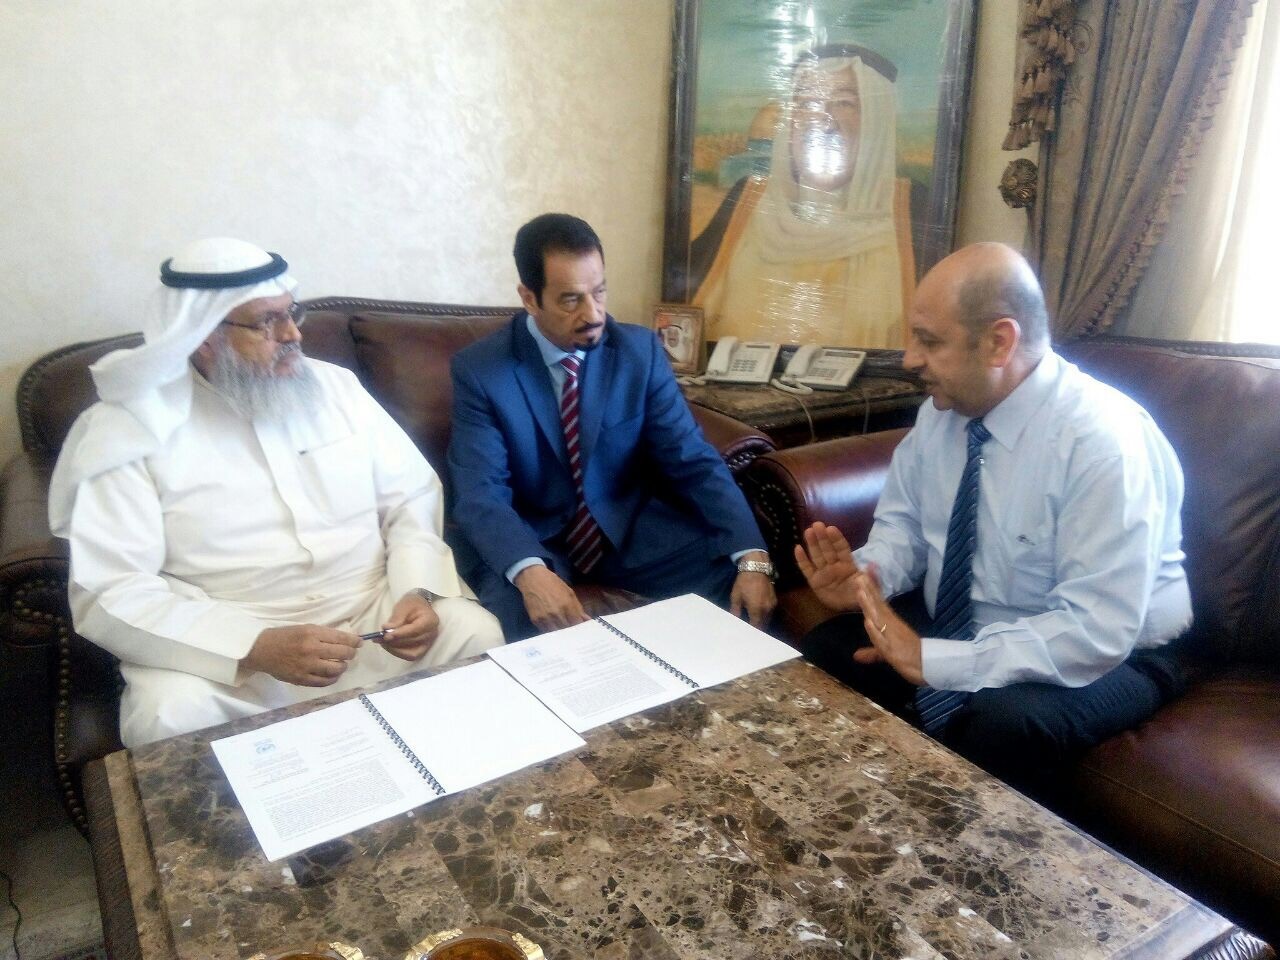 Kuwait's Patients Helping Fund Society's Chairman Dr. Mohammad Al-Sharhan, UNRWA Senior External Relations and Projects Officer Munir Mannah and Ambassador Hamad Al Duaij during the signing ceremony